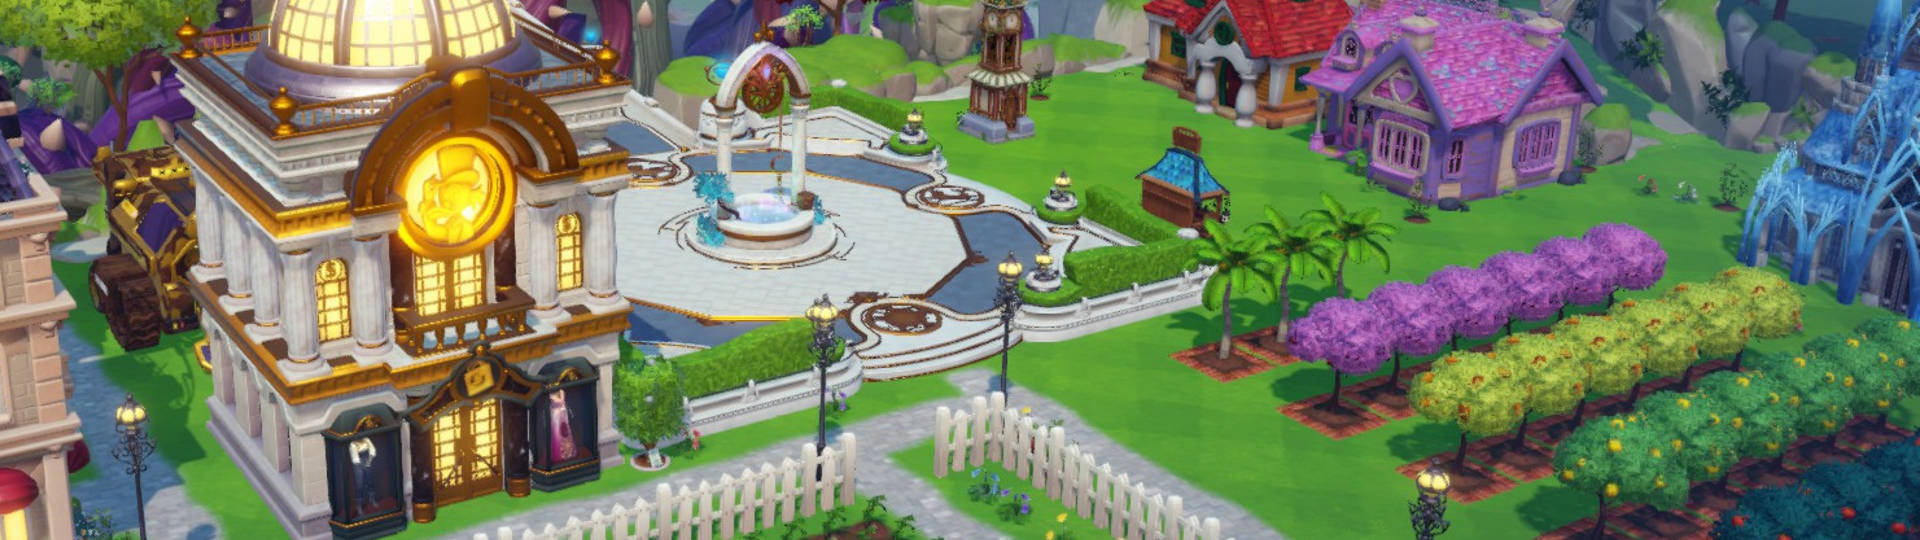 Disney Dreamlight Valley Shop Guide - Scrooge's Store Plaza